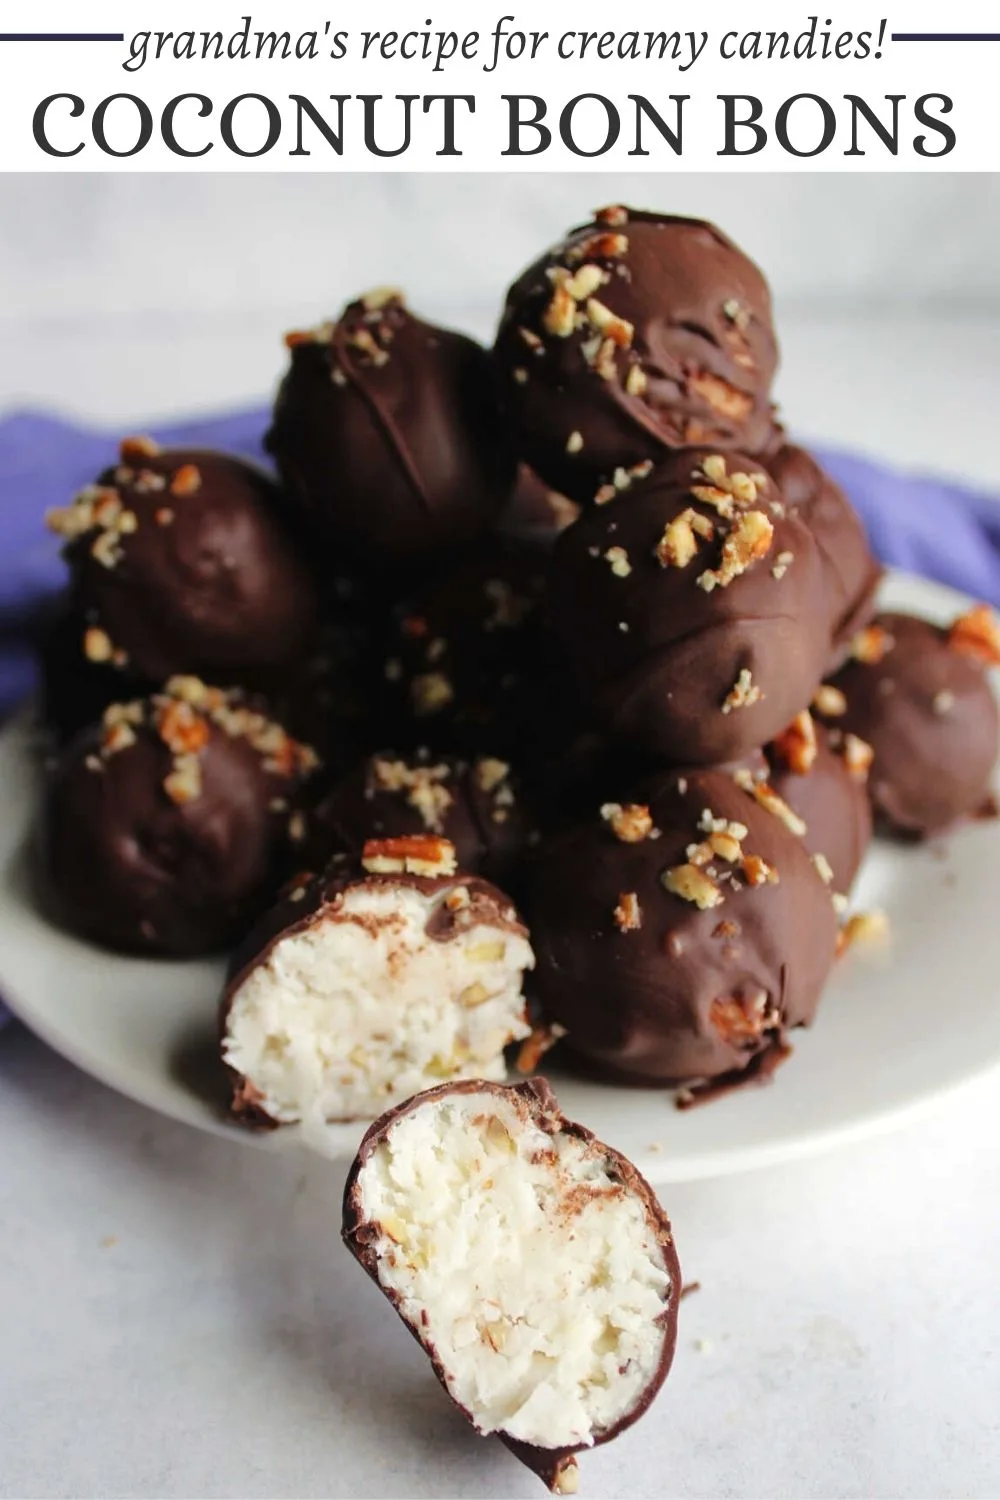 Grandma's recipe for coconut bon bons feature a sweet buttery center and chocolate shell. You can make them with or without nuts for an indulgent and delicious treat. 